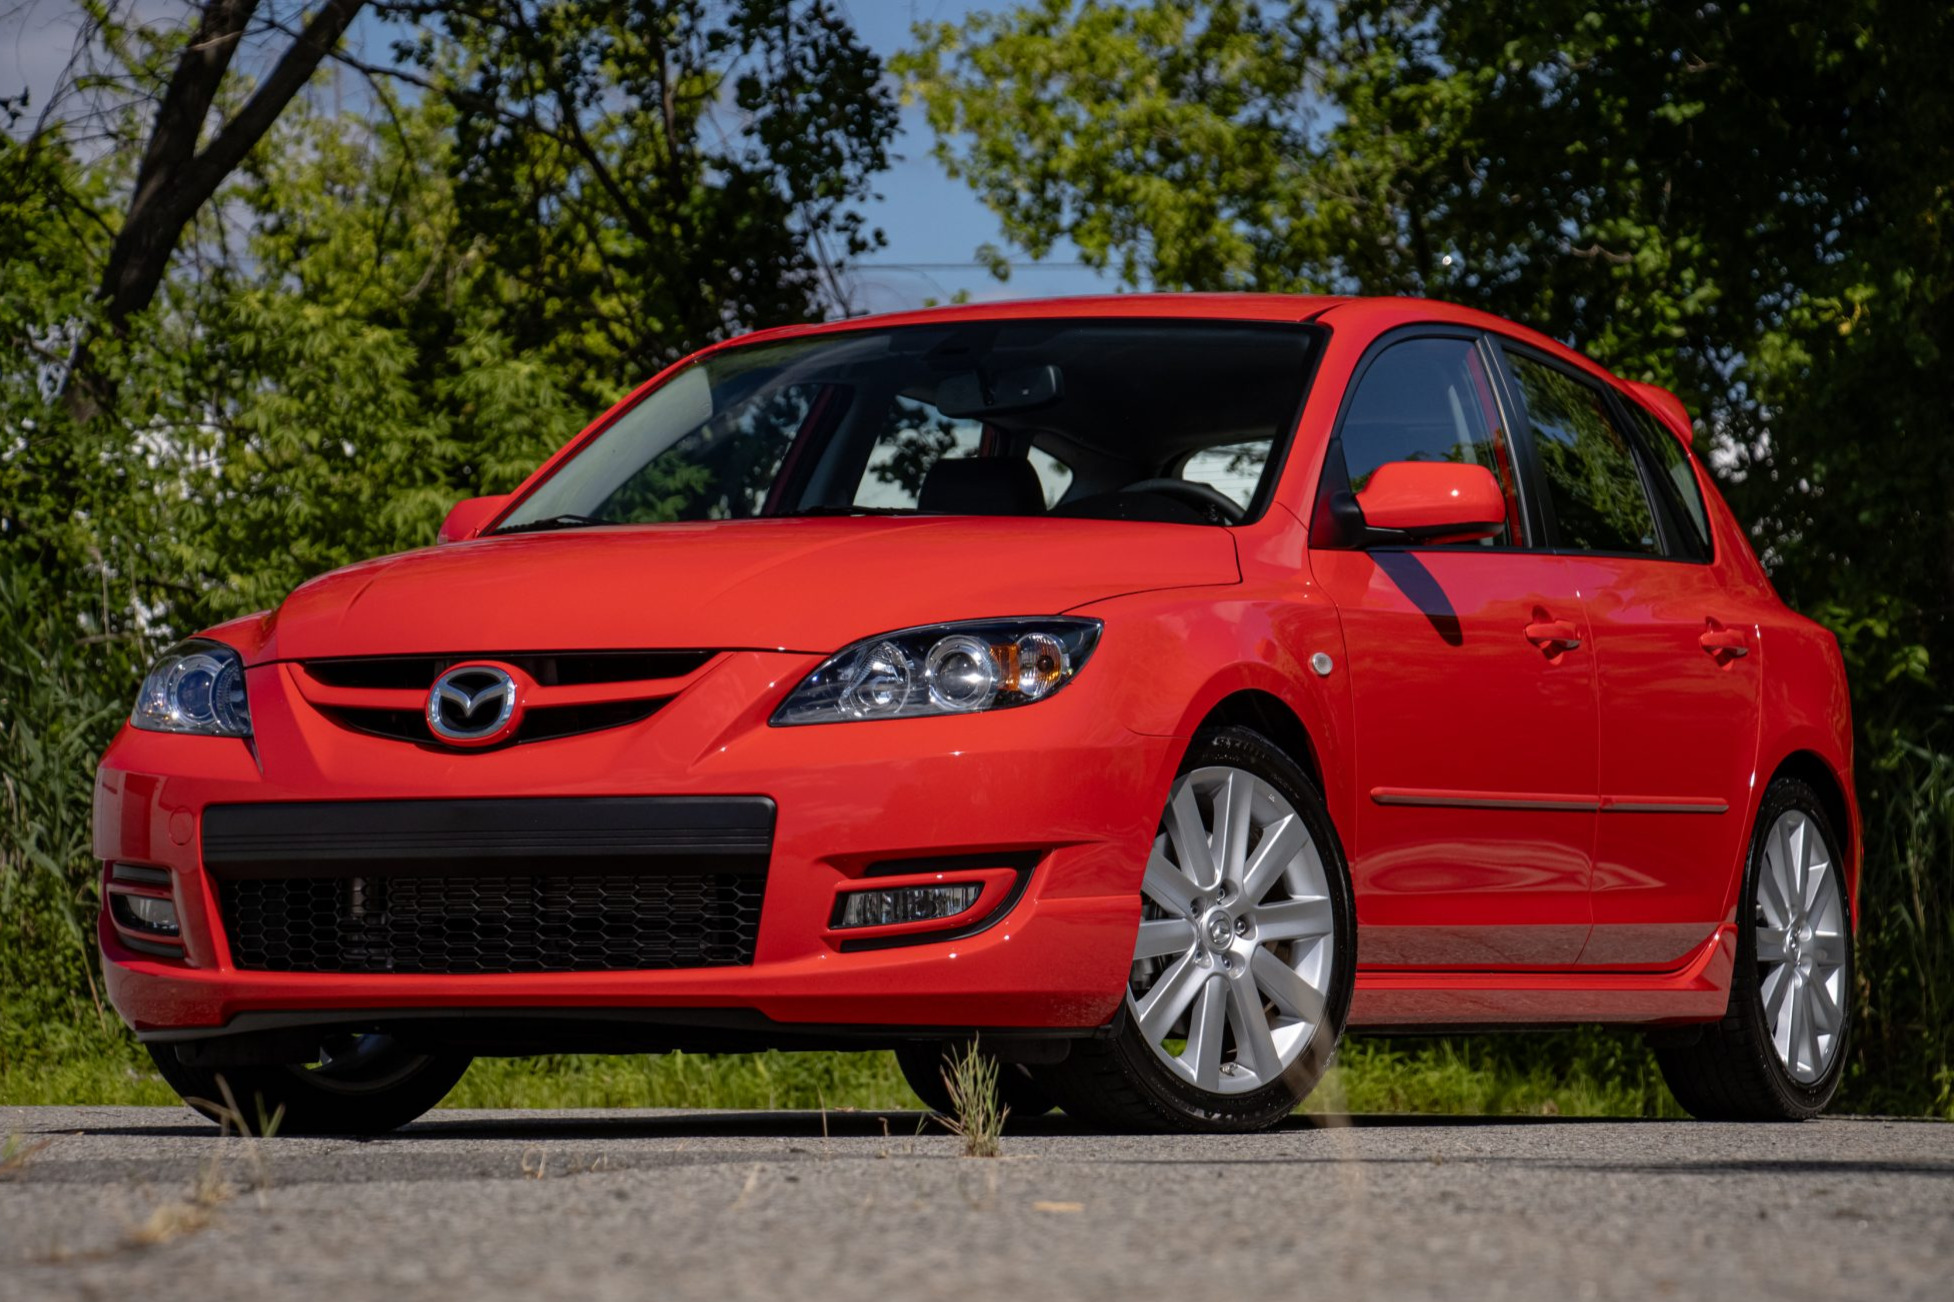 Used 2,300-Mile 2007 Mazda Mazdaspeed3 Grand Touring Review